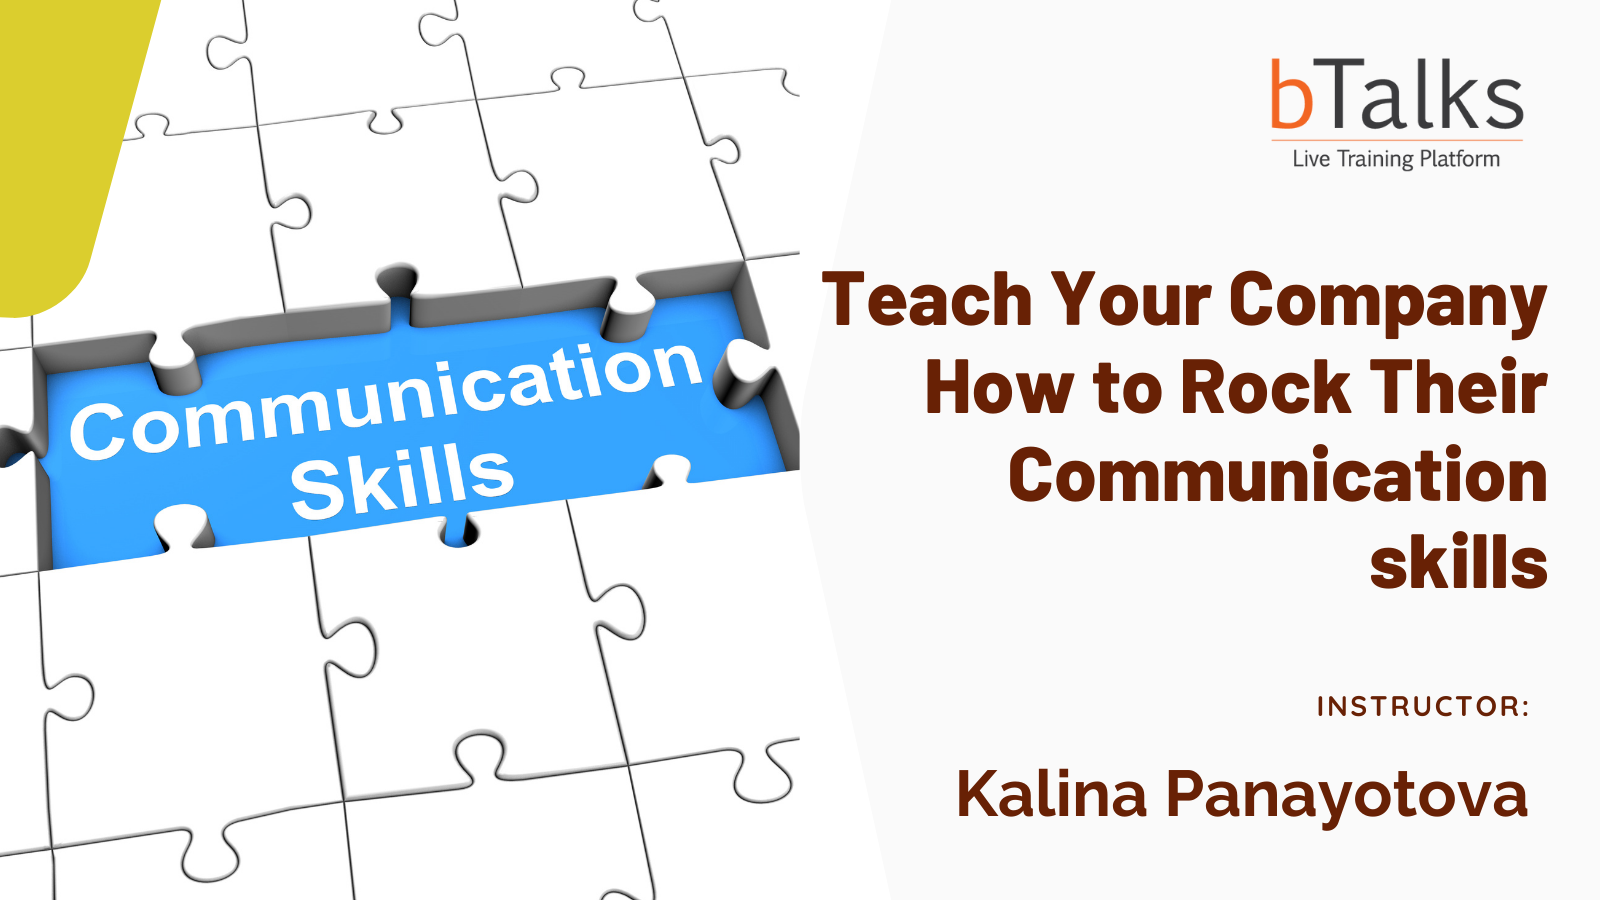 Teach Your Company How to Rock Their Communication Skills